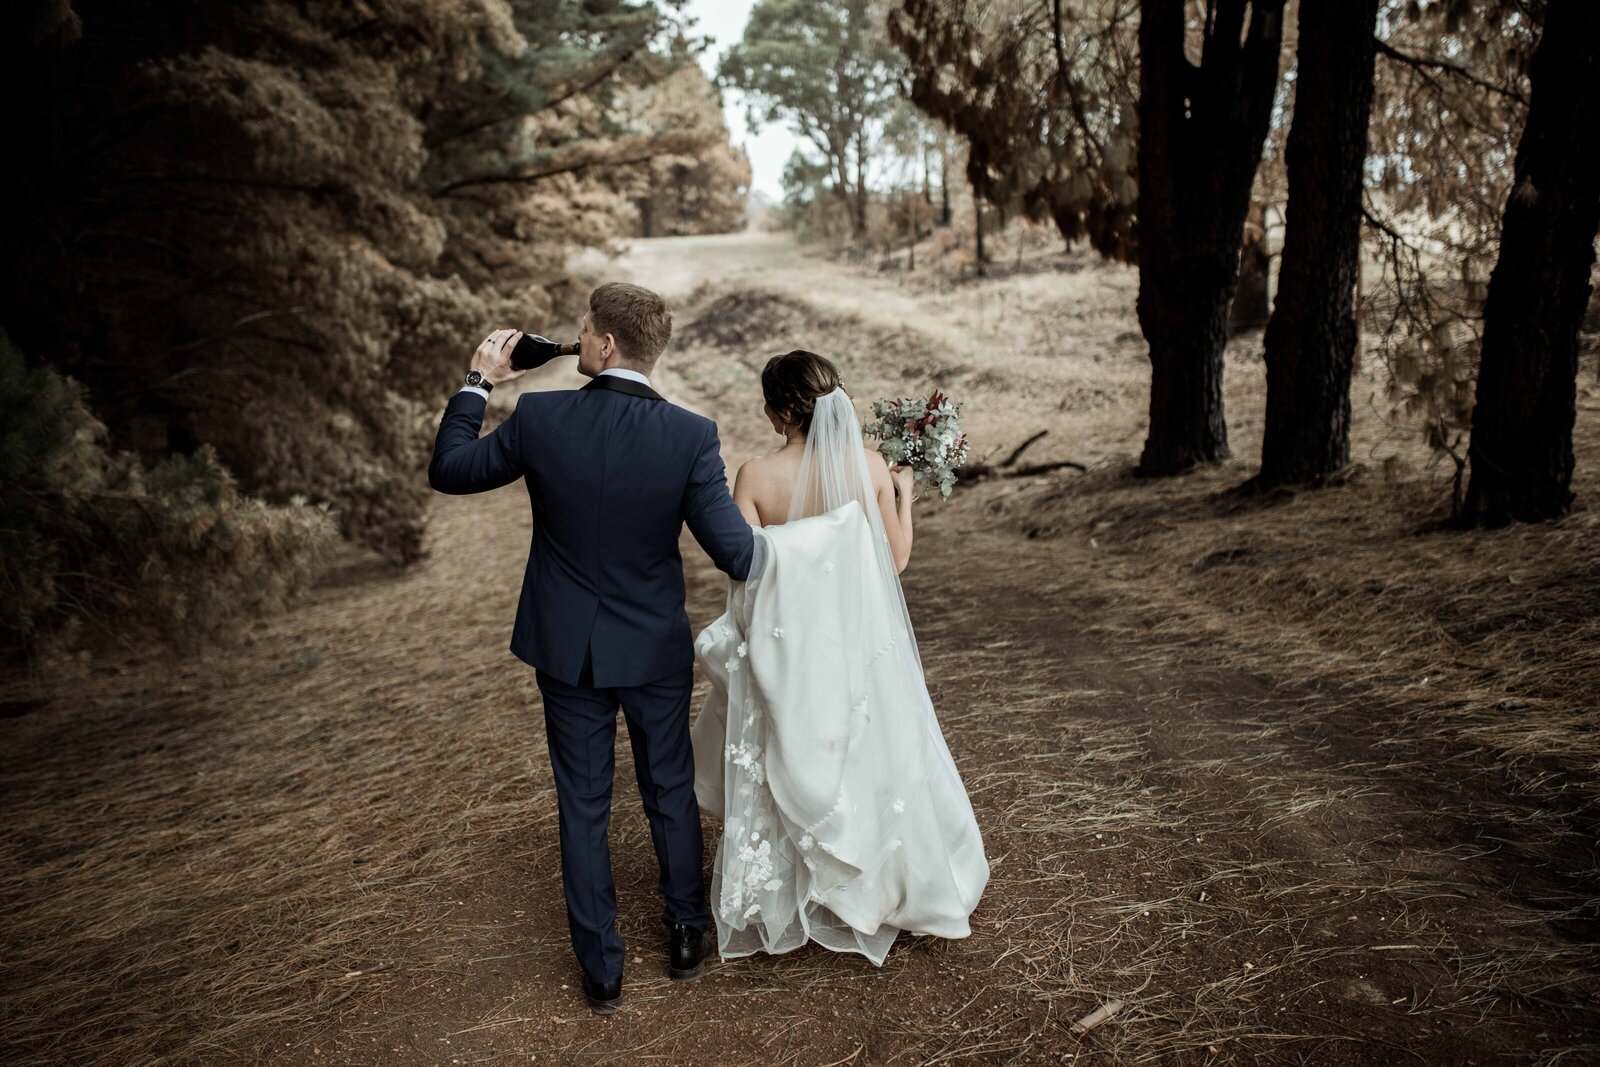 M&R-Anderson-Hill-Rexvil-Photography-Adelaide-Wedding-Photographer-548